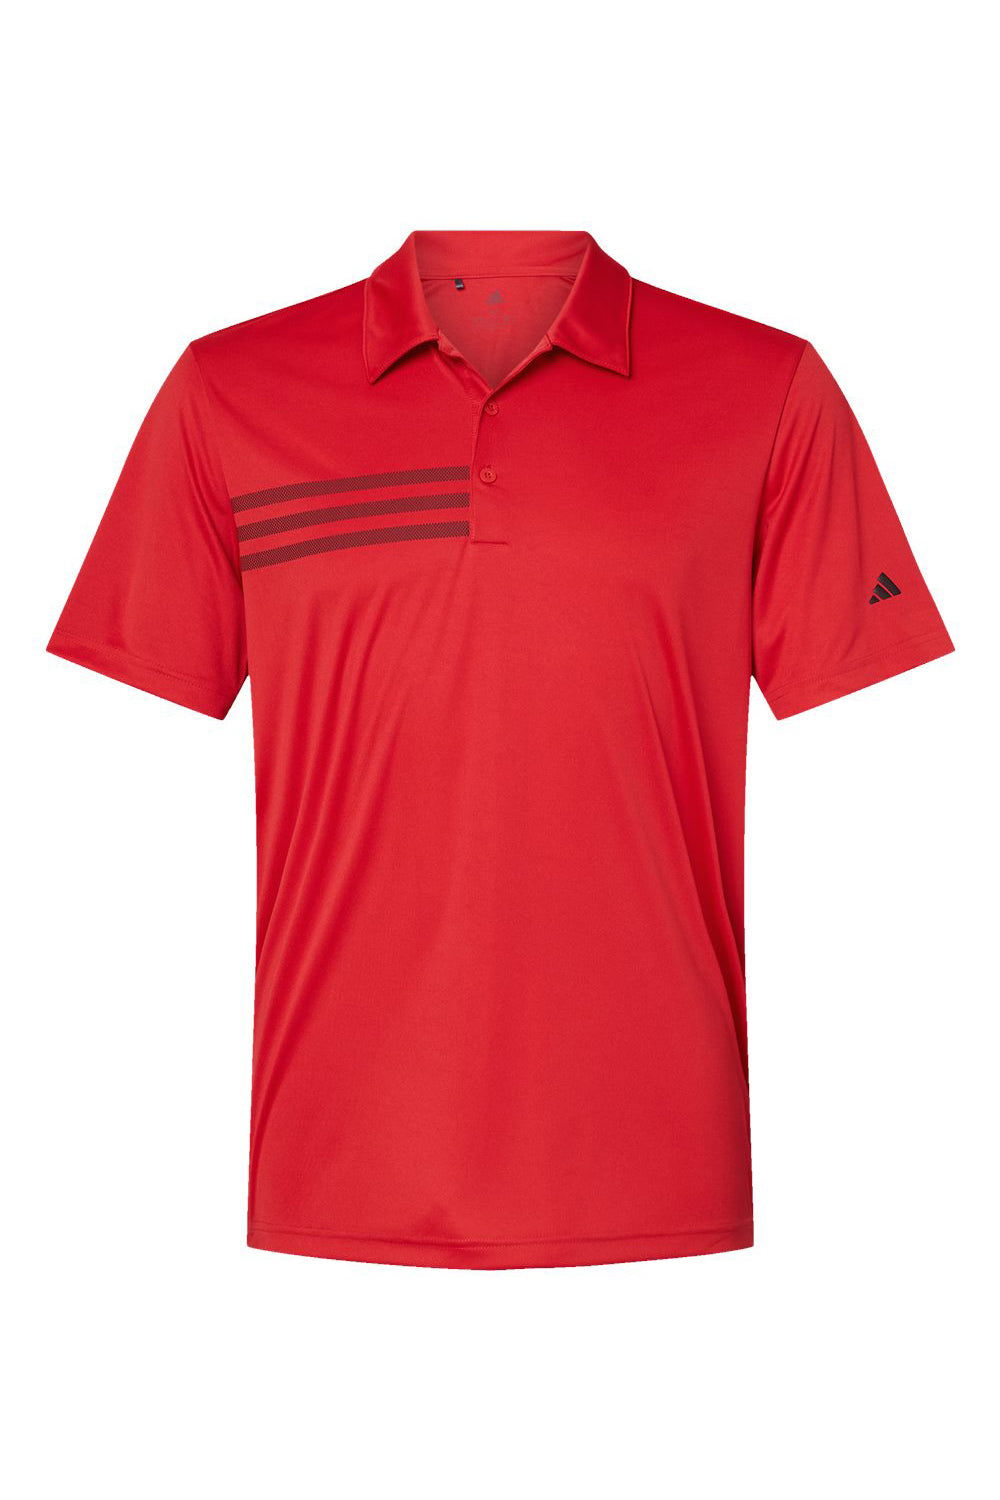 Adidas A324 Mens 3 Stripes UPF 50+ Short Sleeve Polo Shirt Collegiate Red/Black Flat Front